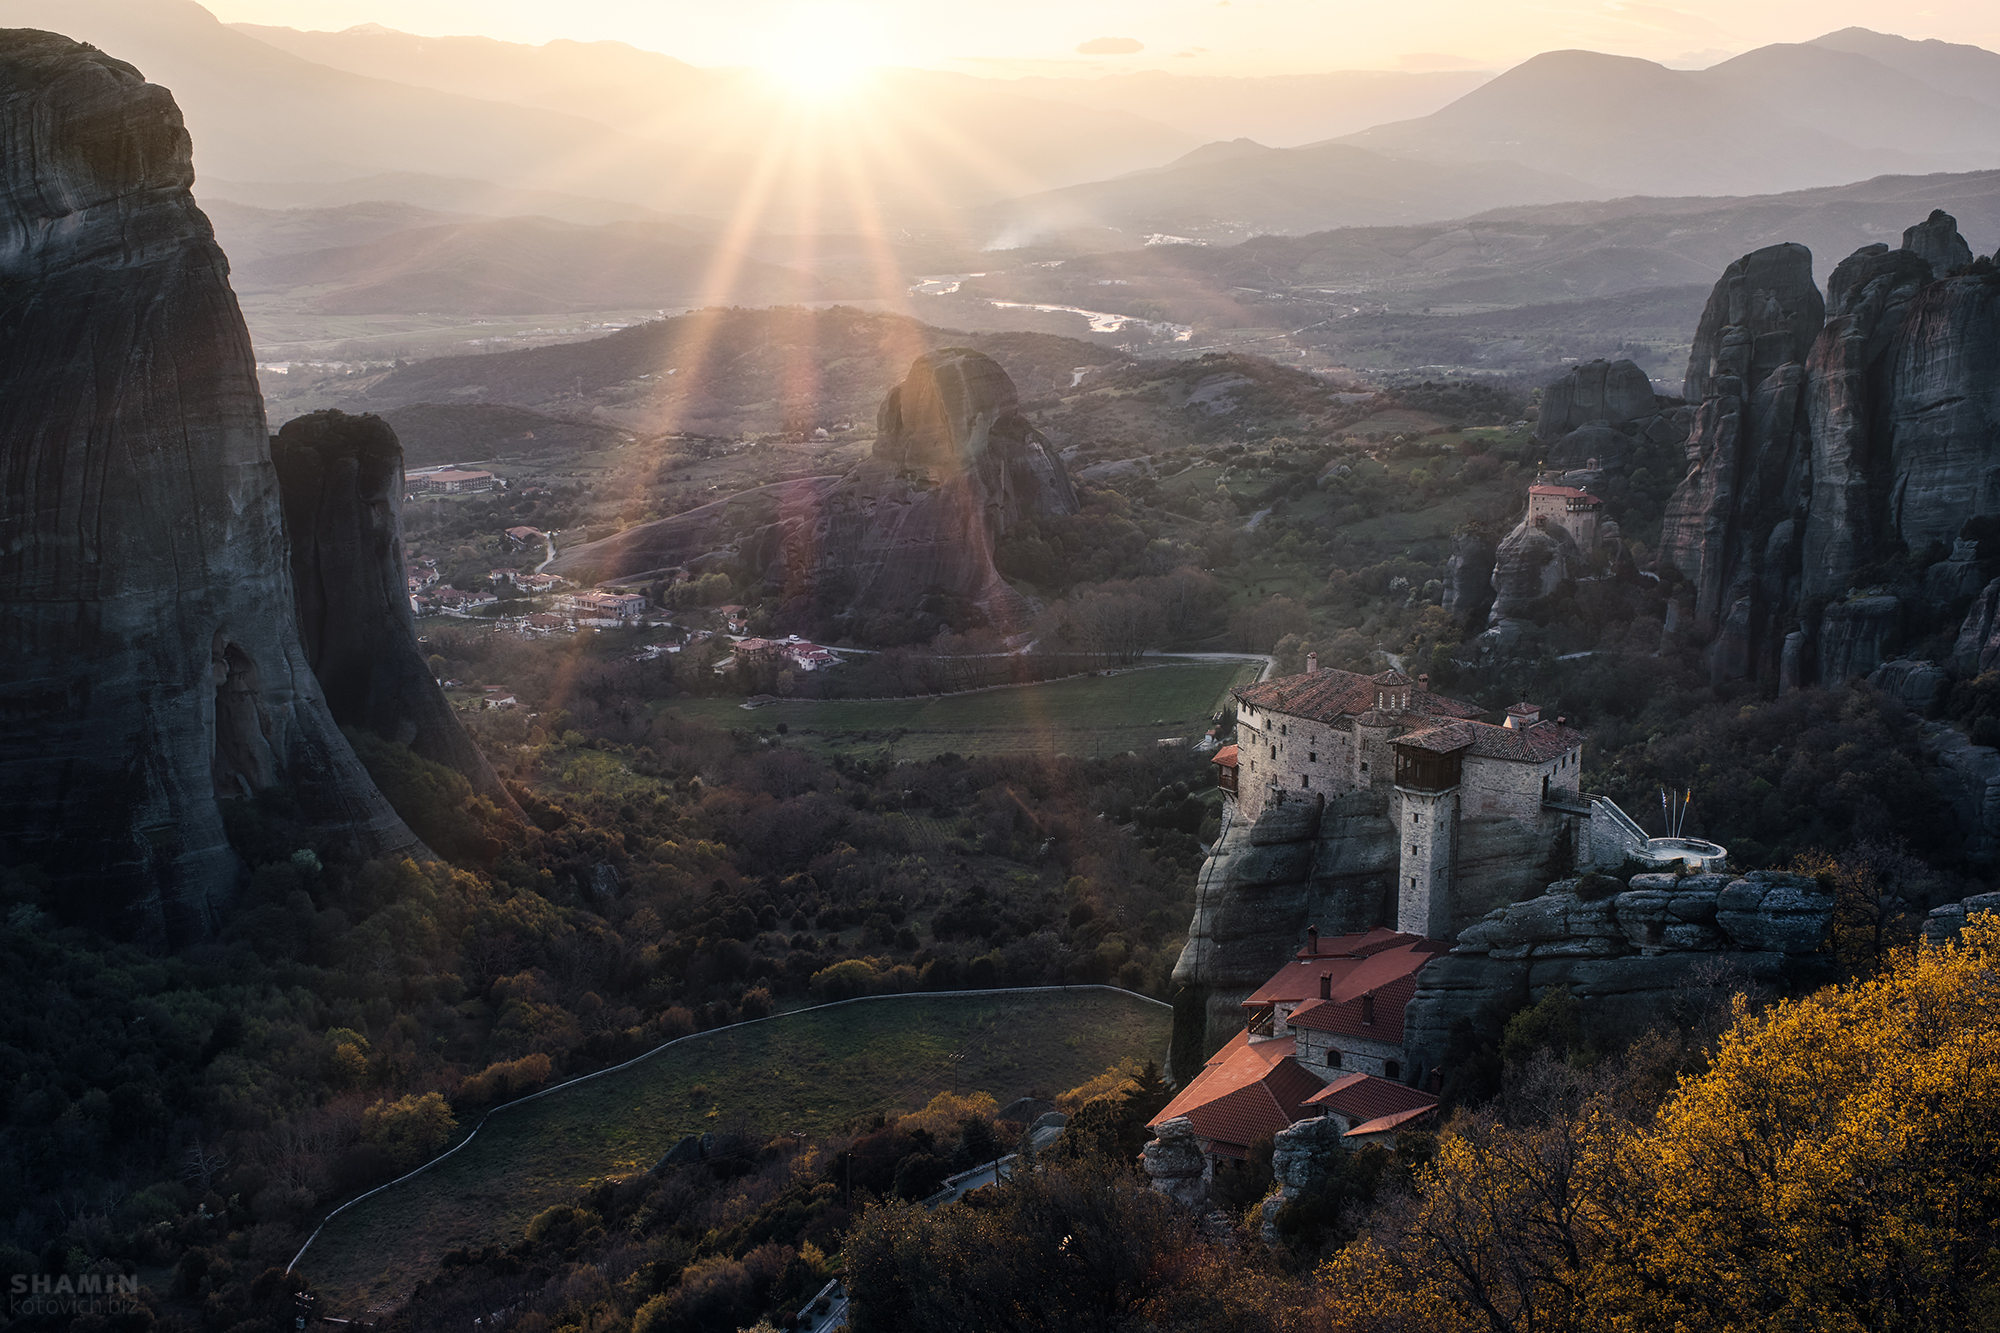 General 2000x1333 nature landscape trees monastery Meteora Greece mountains sun rays fall forest valley sunlight